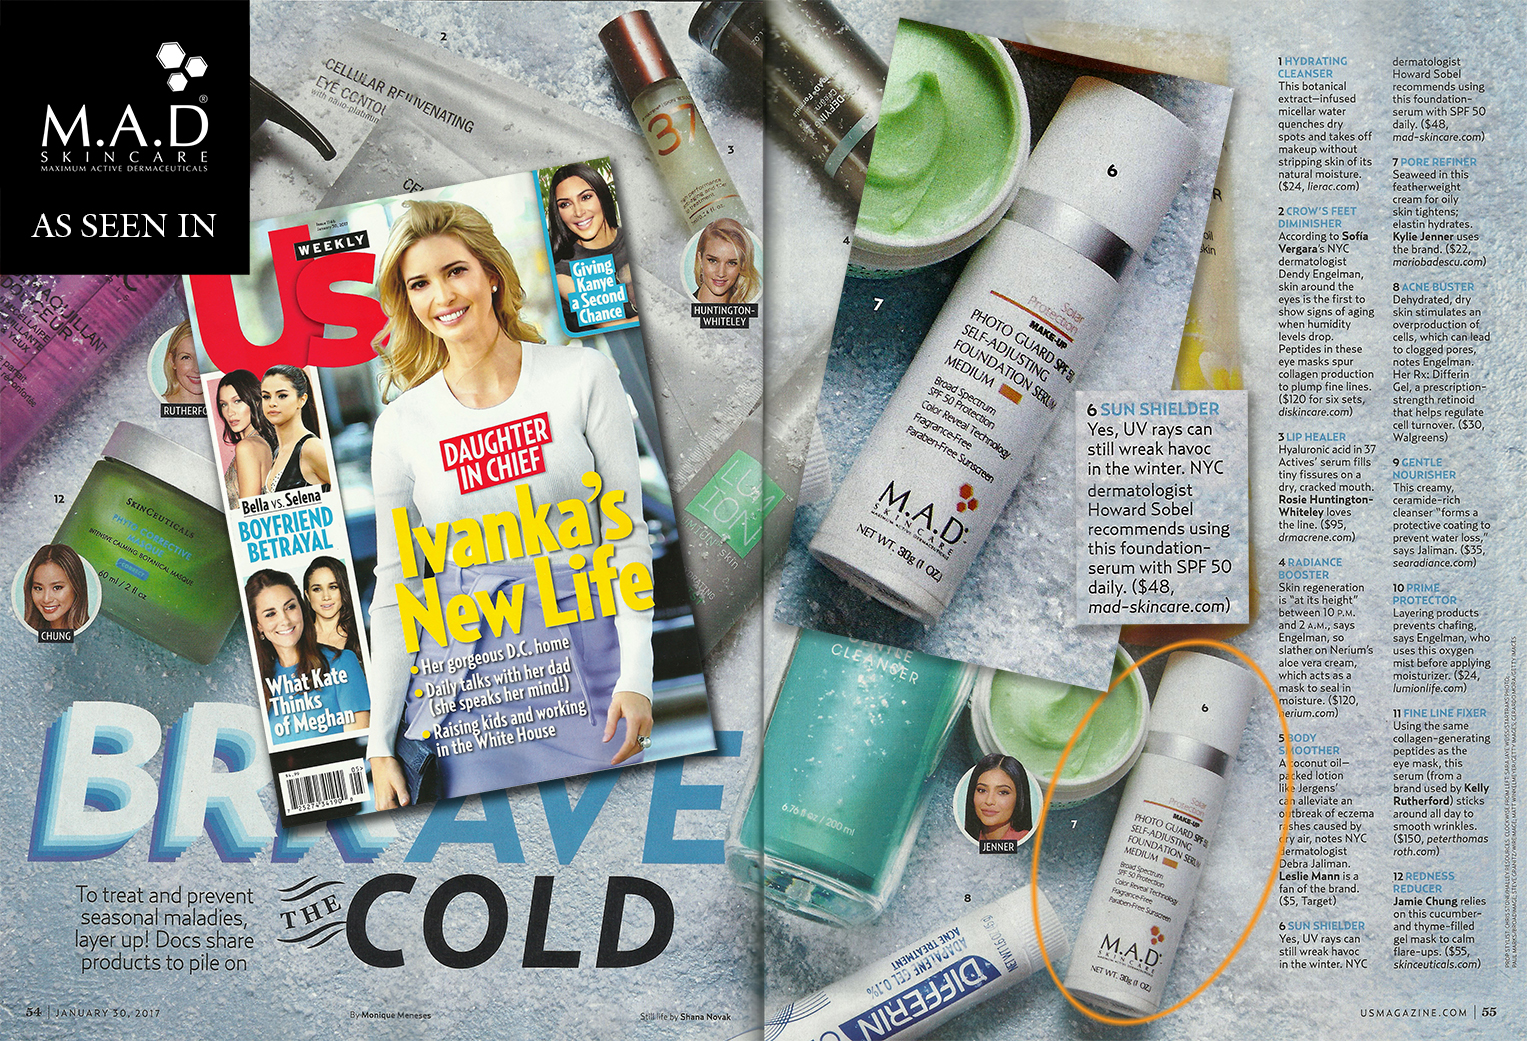 M.A.D Skincare takes center stage on the cover of ‘US Weekly’!